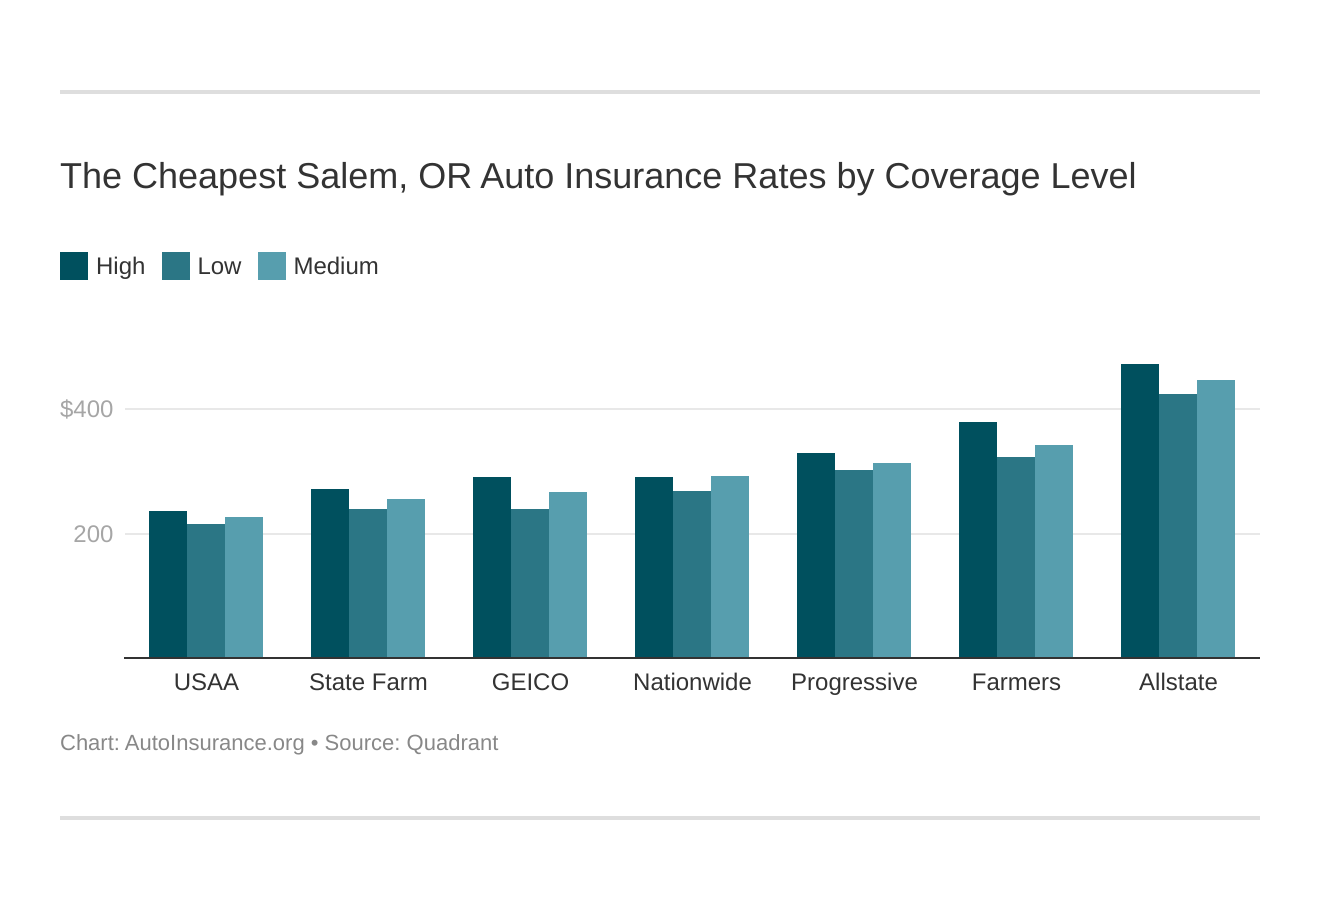 The Cheapest Salem, OR Auto Insurance Rates by Coverage Level